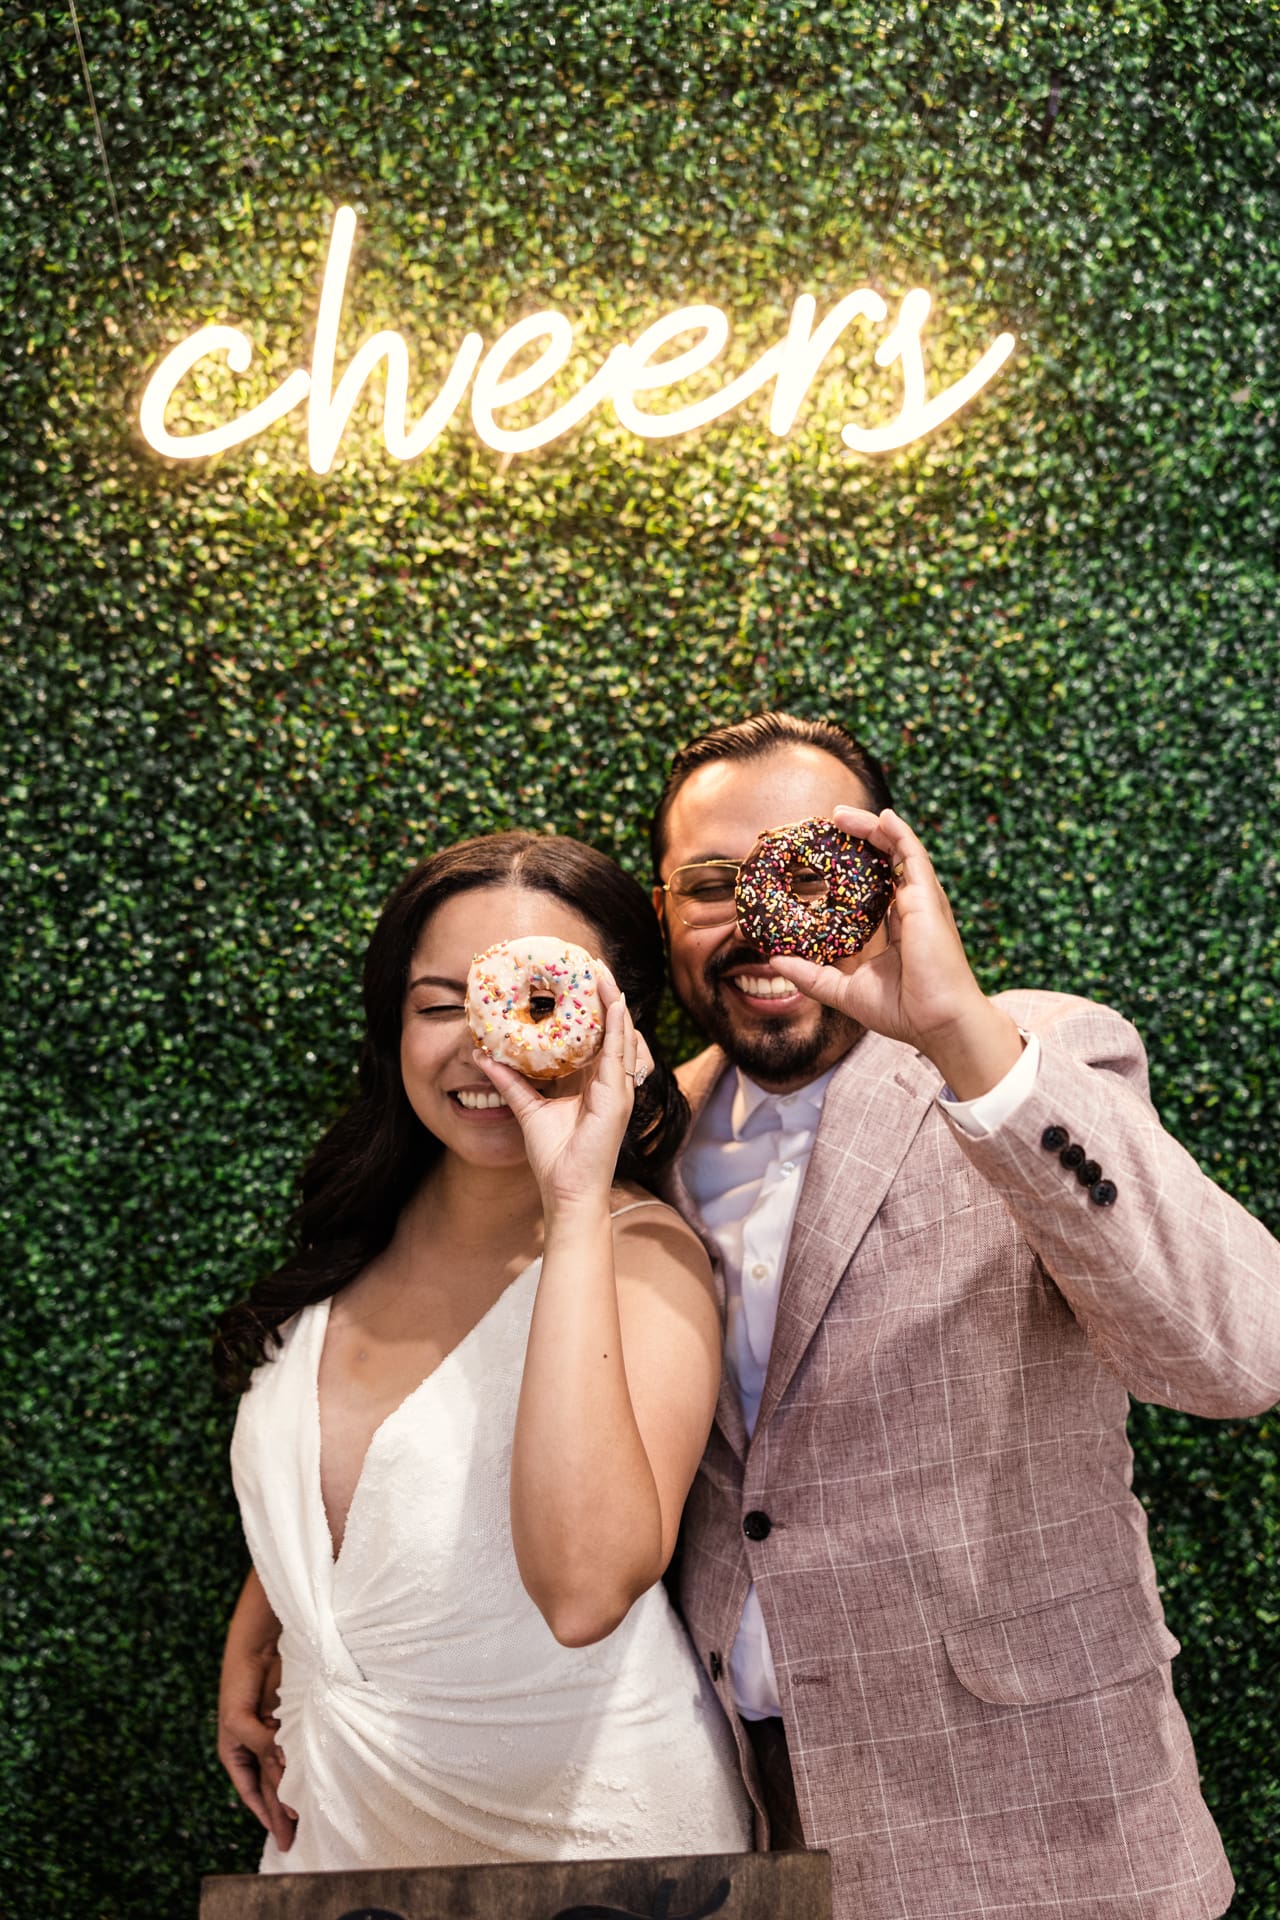 Fun photo of bride and groom holding donuts in front of greenery wall with Cheers neon sign after their intimate wedding ceremony at P&M Studio Chicago event space in West Town